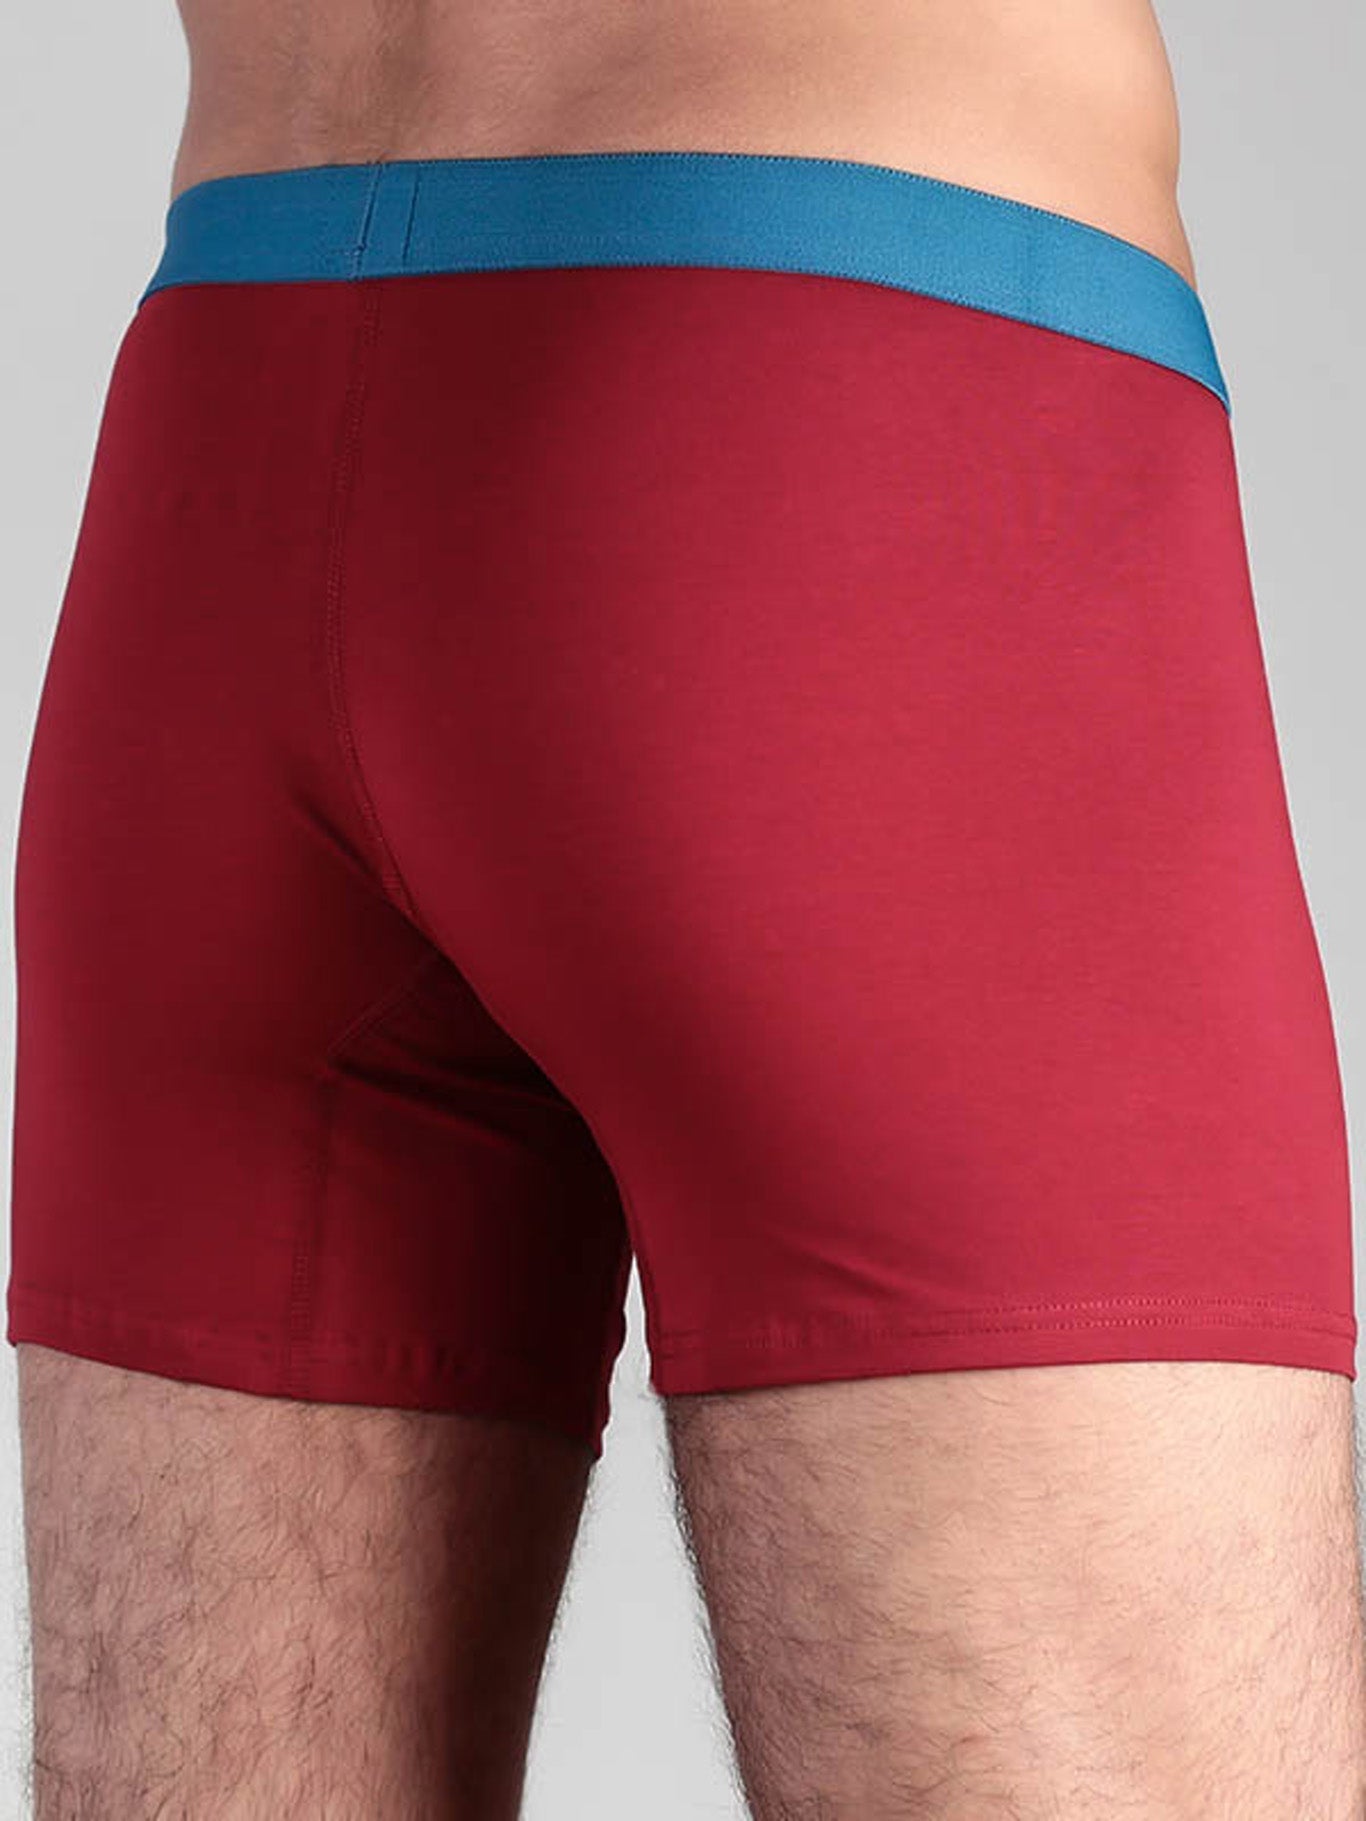 2131-04 | Boxer shorts red